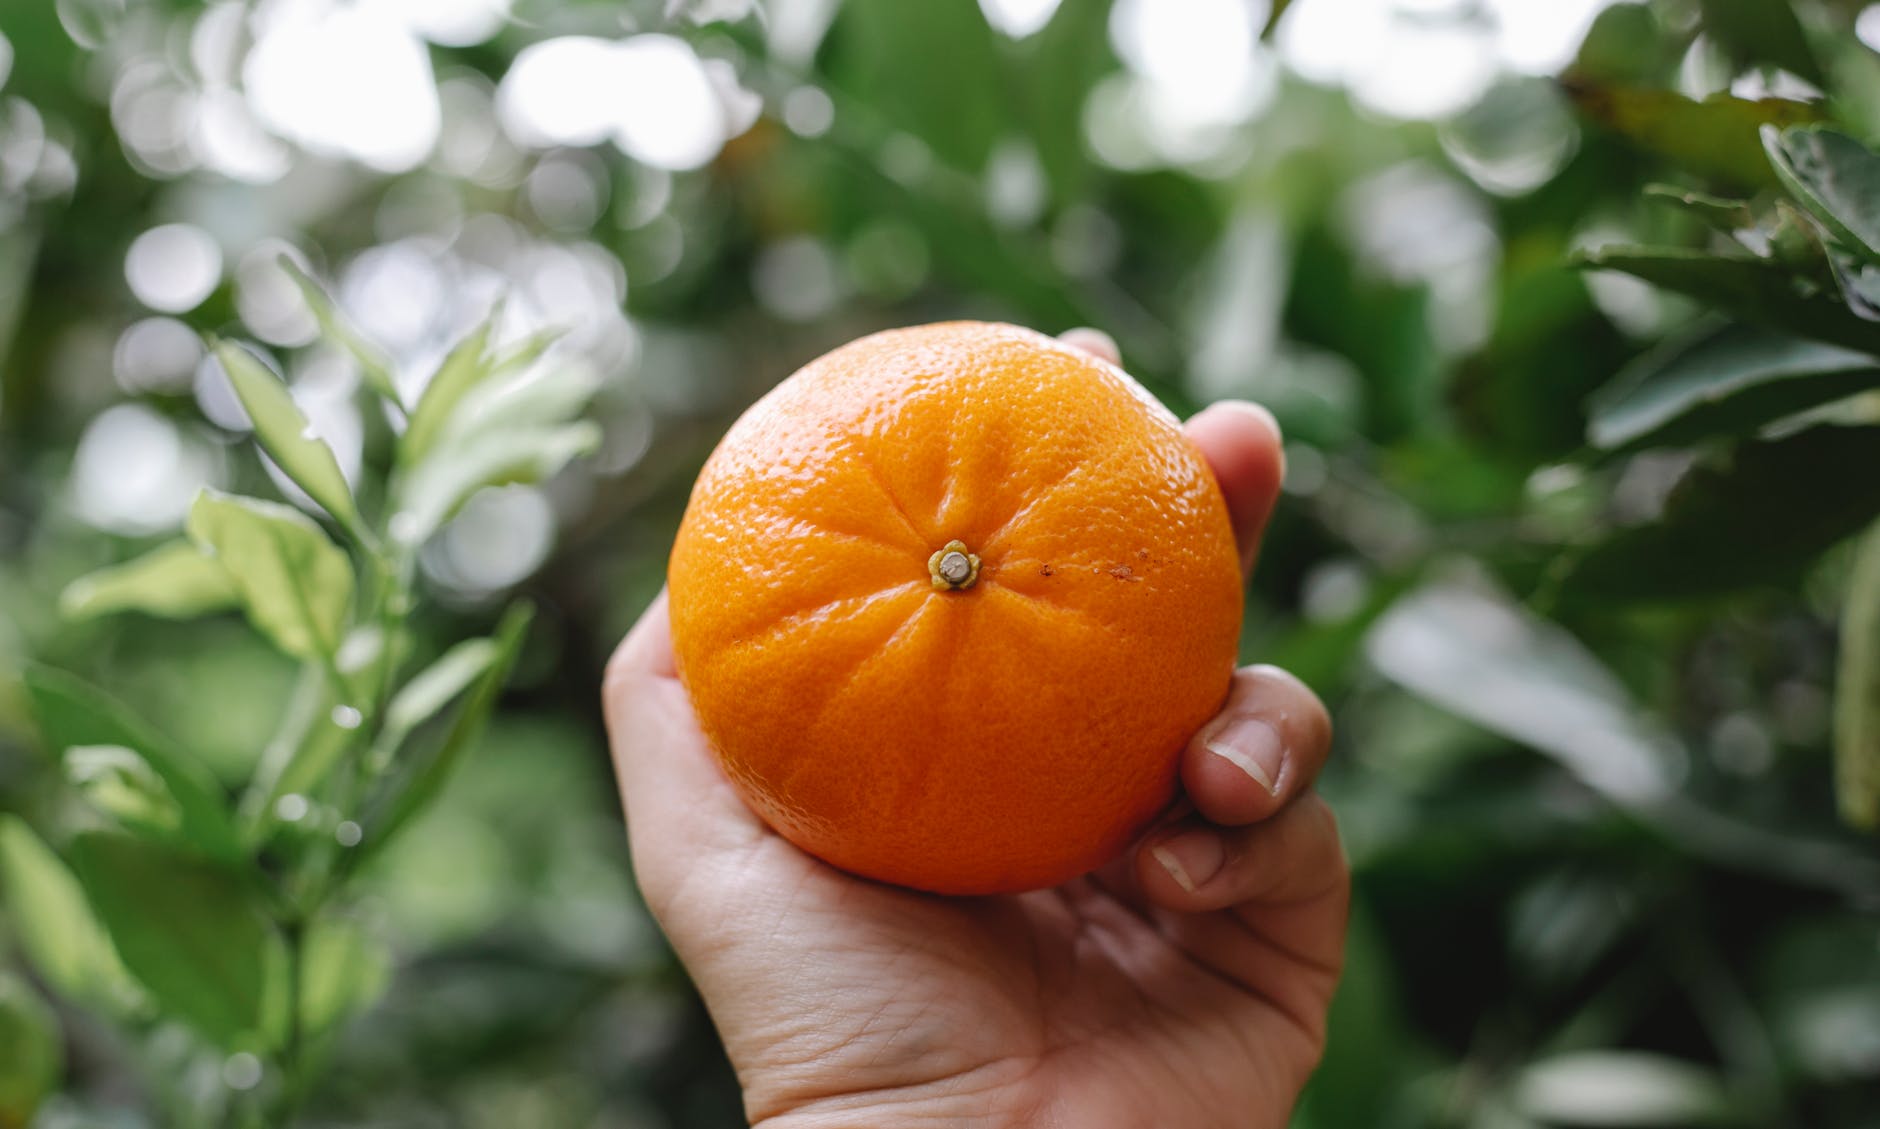 crop person showing fresh ripe tangerine against greenery